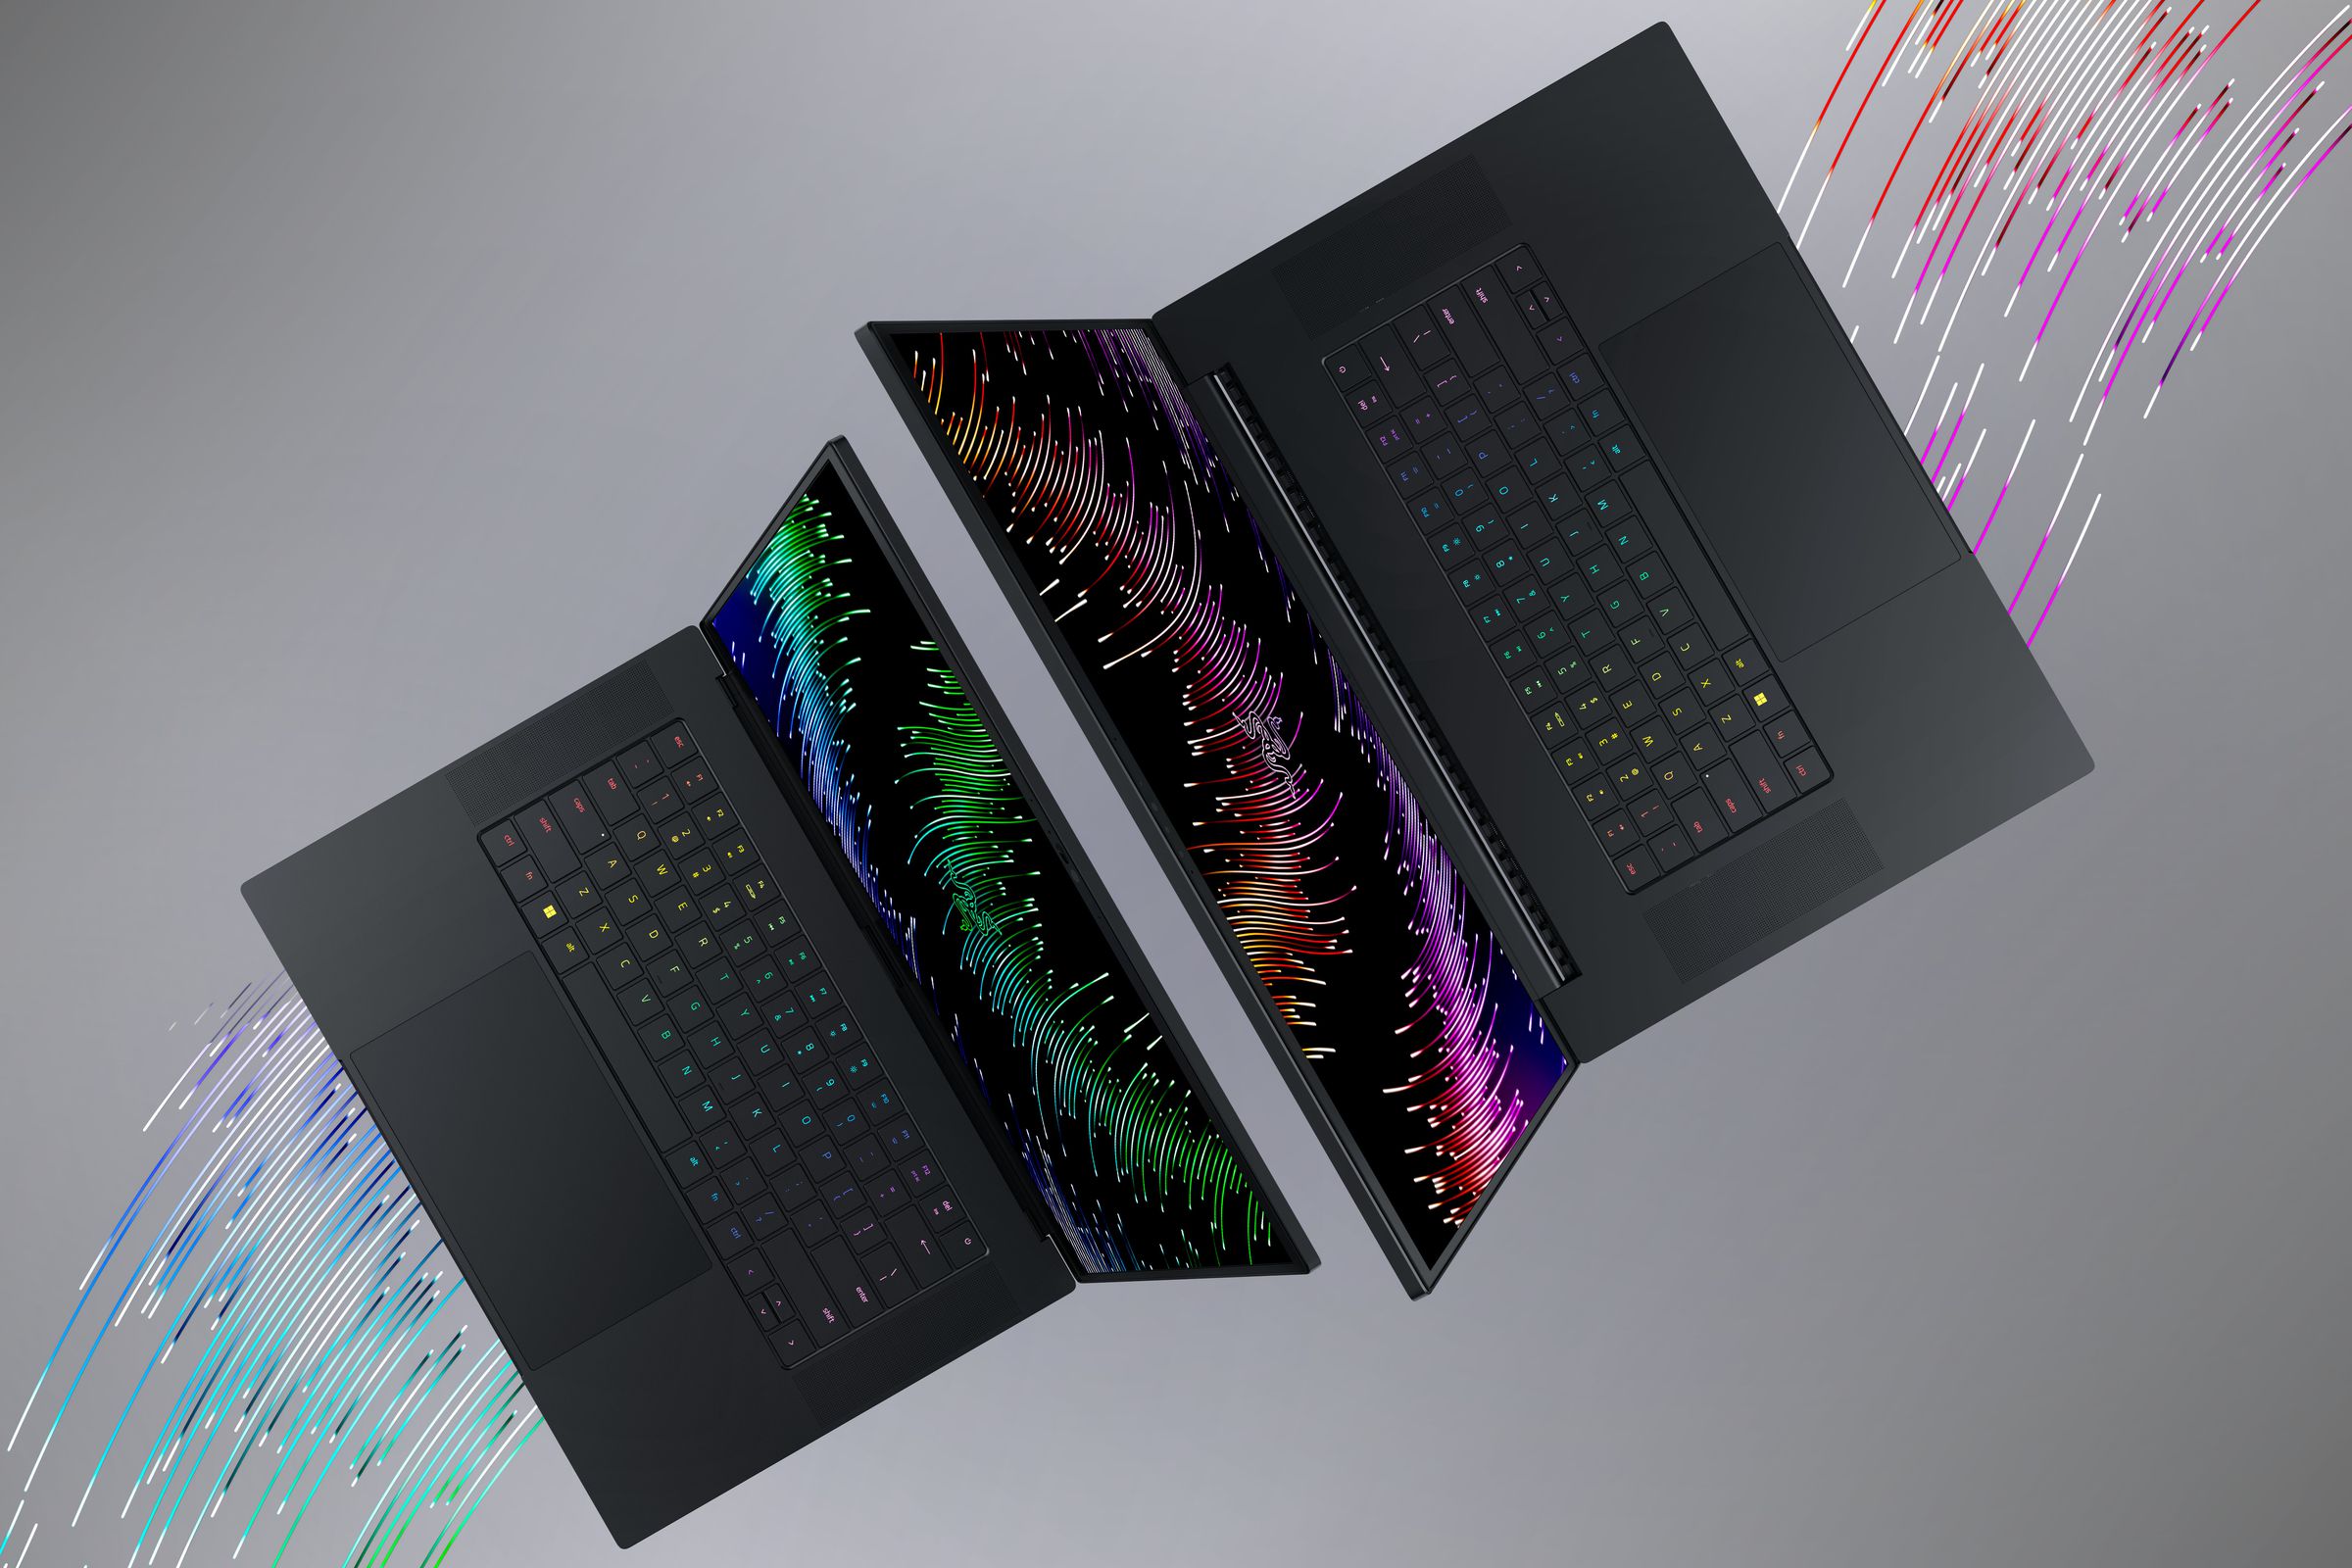 An artistic top-down rendering of the Razer Blade 16 and 18 gaming laptops reveals their displays, keyboards and trackpads.